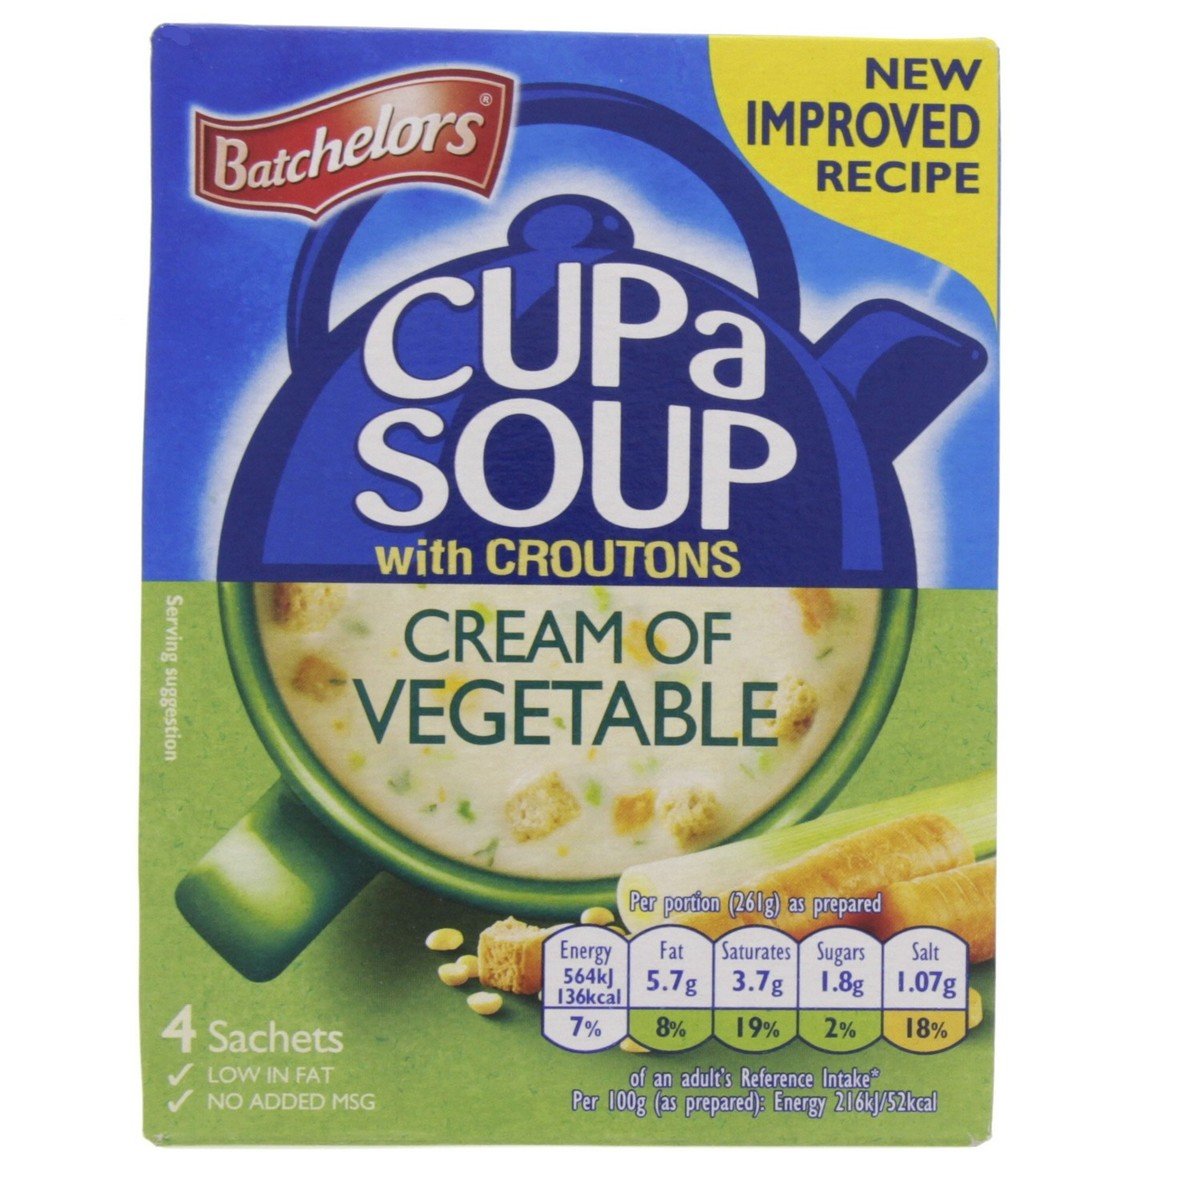 Batchelors Cup A Soup Cream of Vegetable with Croutons 122 g